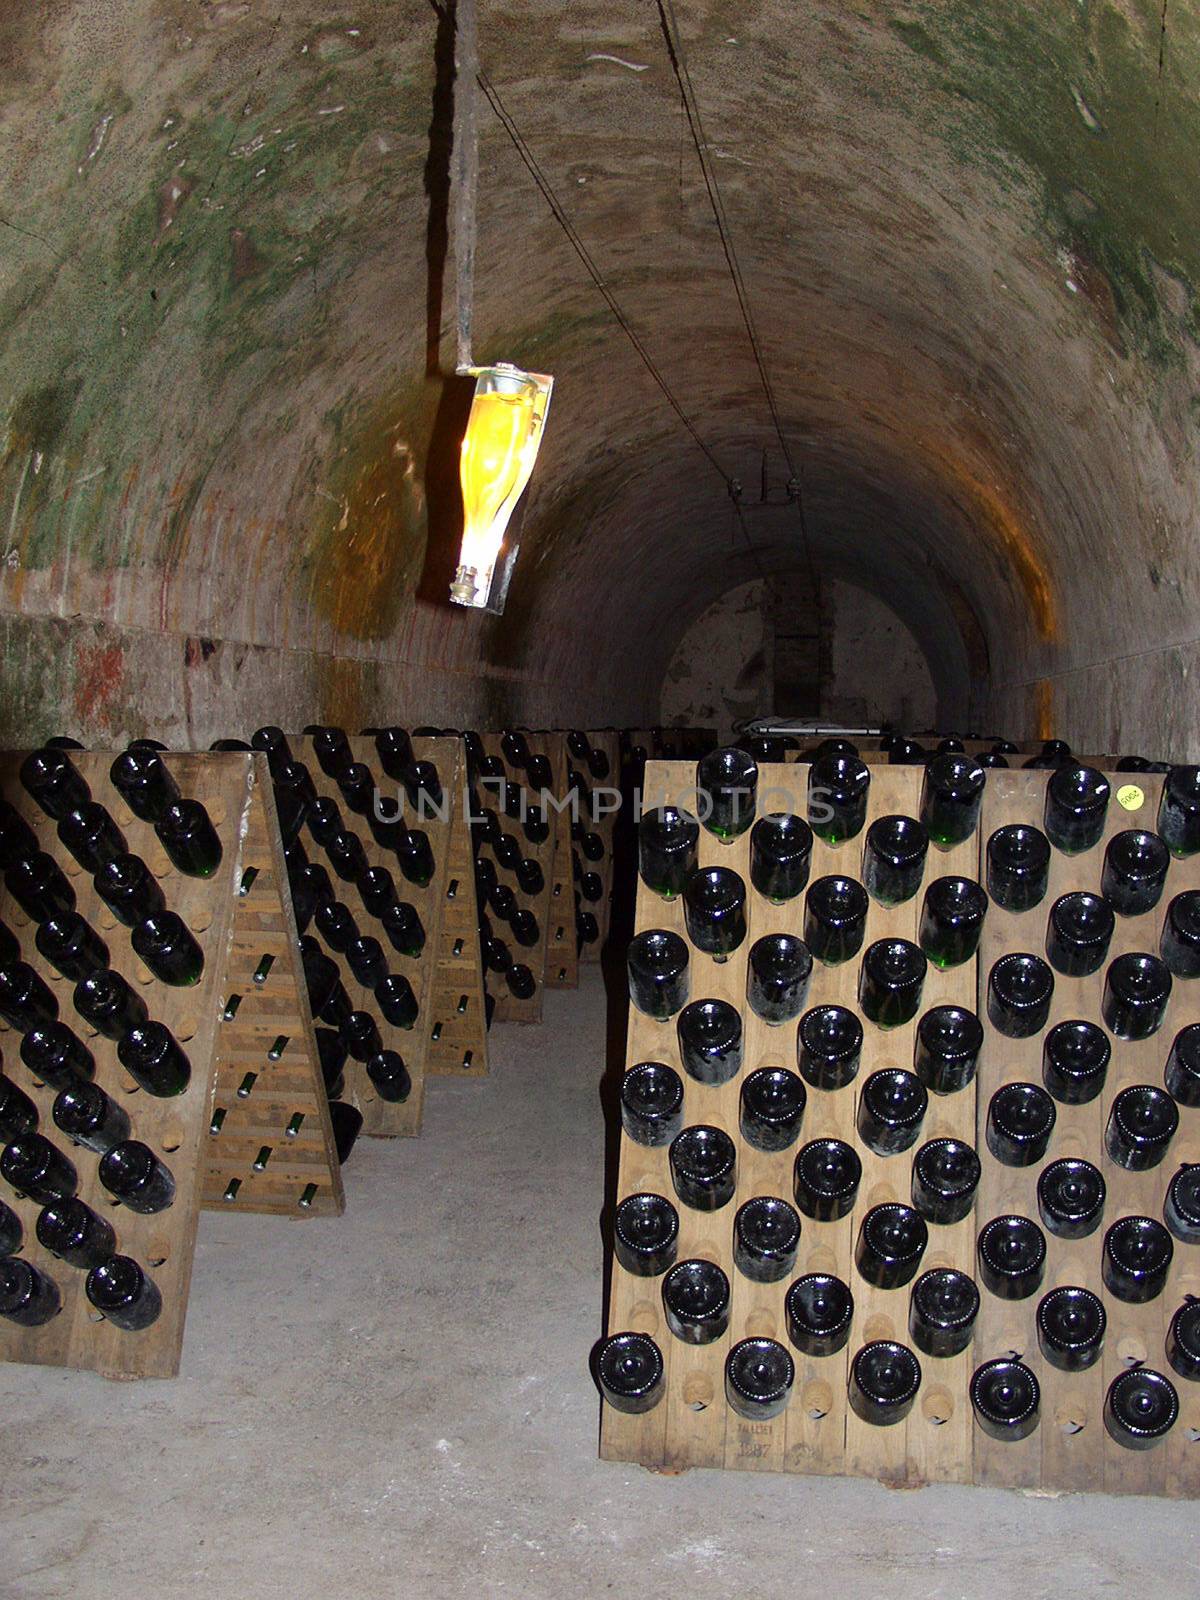 In the cellar of champagne producers by NickNick